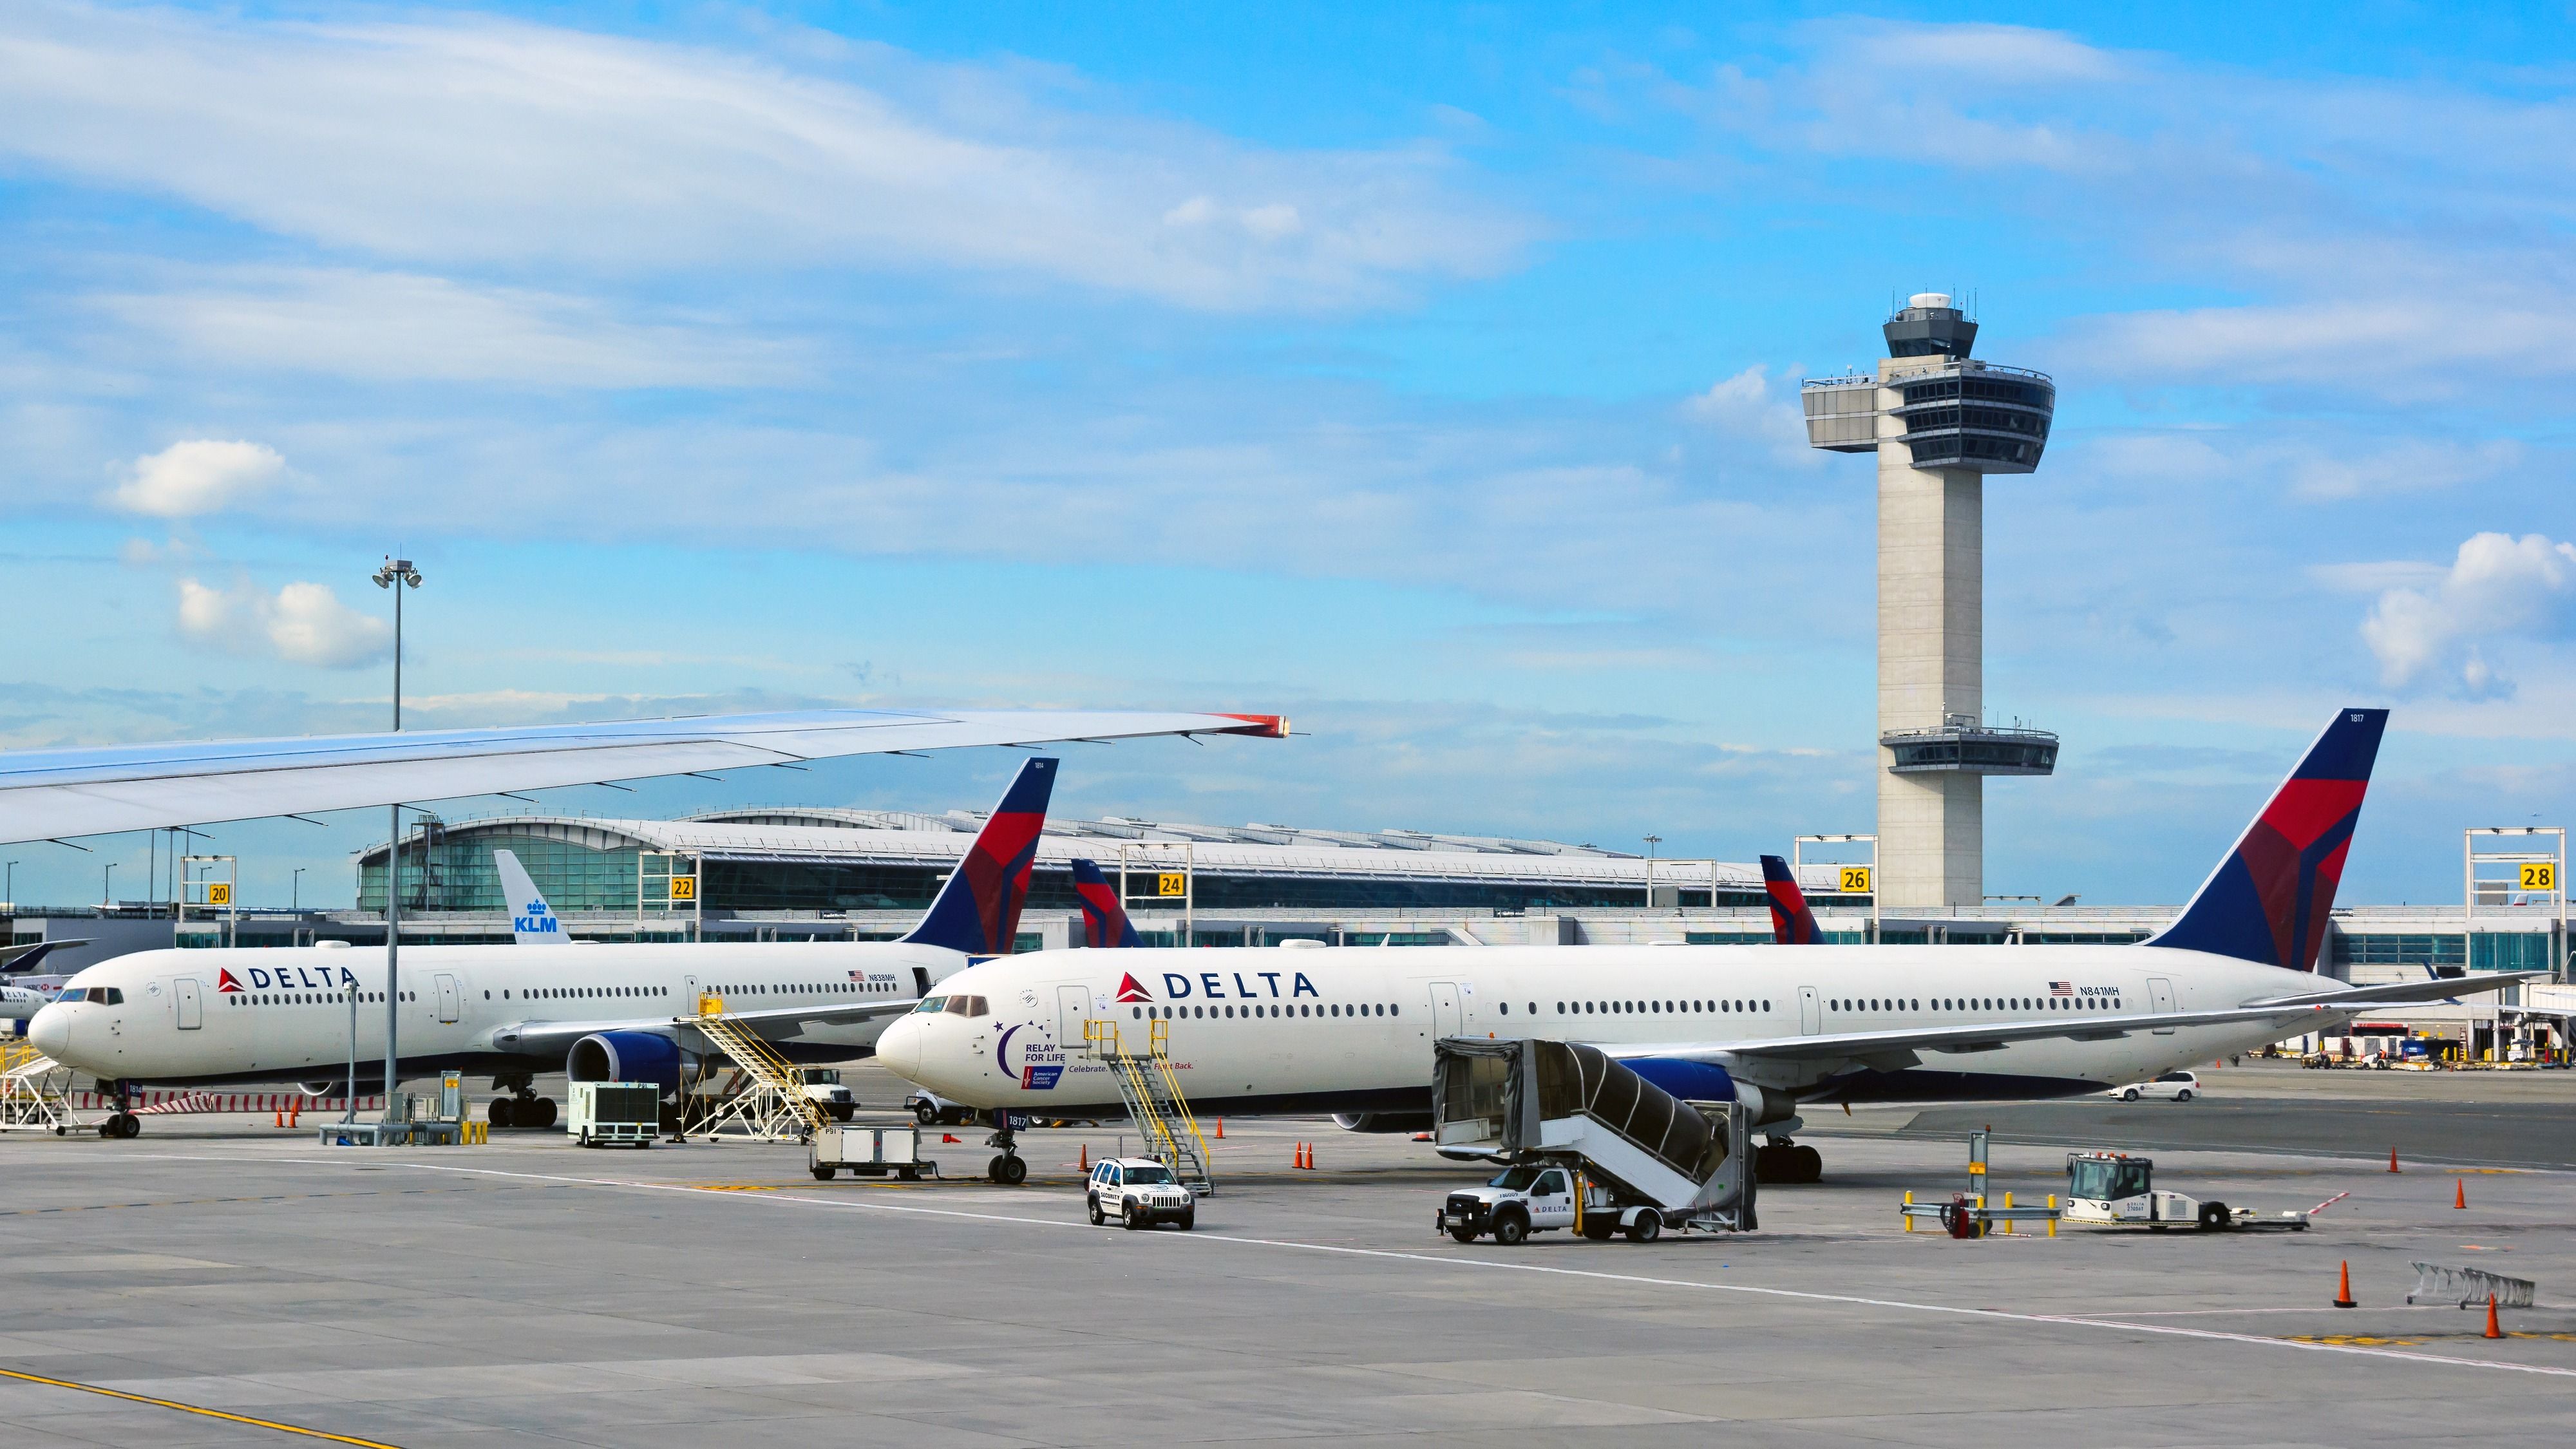 iew of apron of John F. Kennedy (JFK) International airport with parked Delta Air Lines' planes and the control tower in background